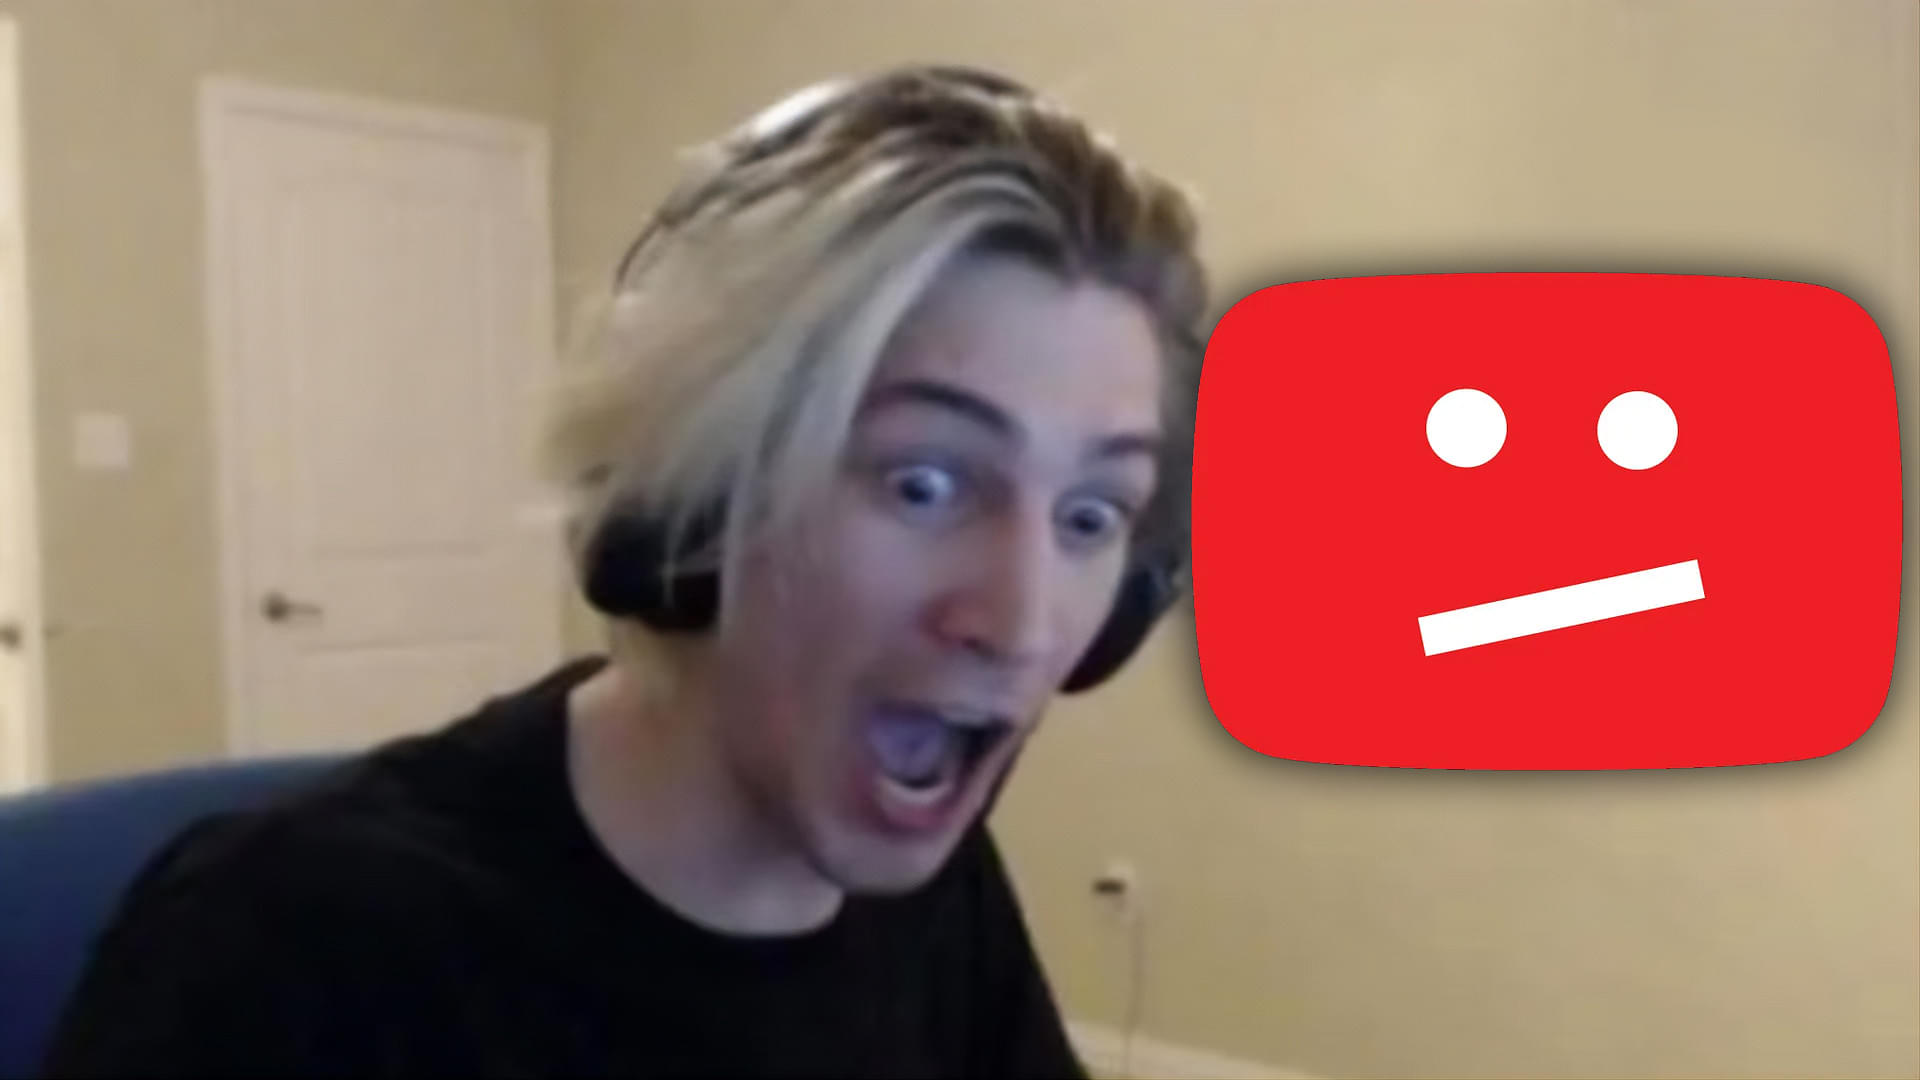 An image showing xQc who has been taken down on YouTube due to legal issues